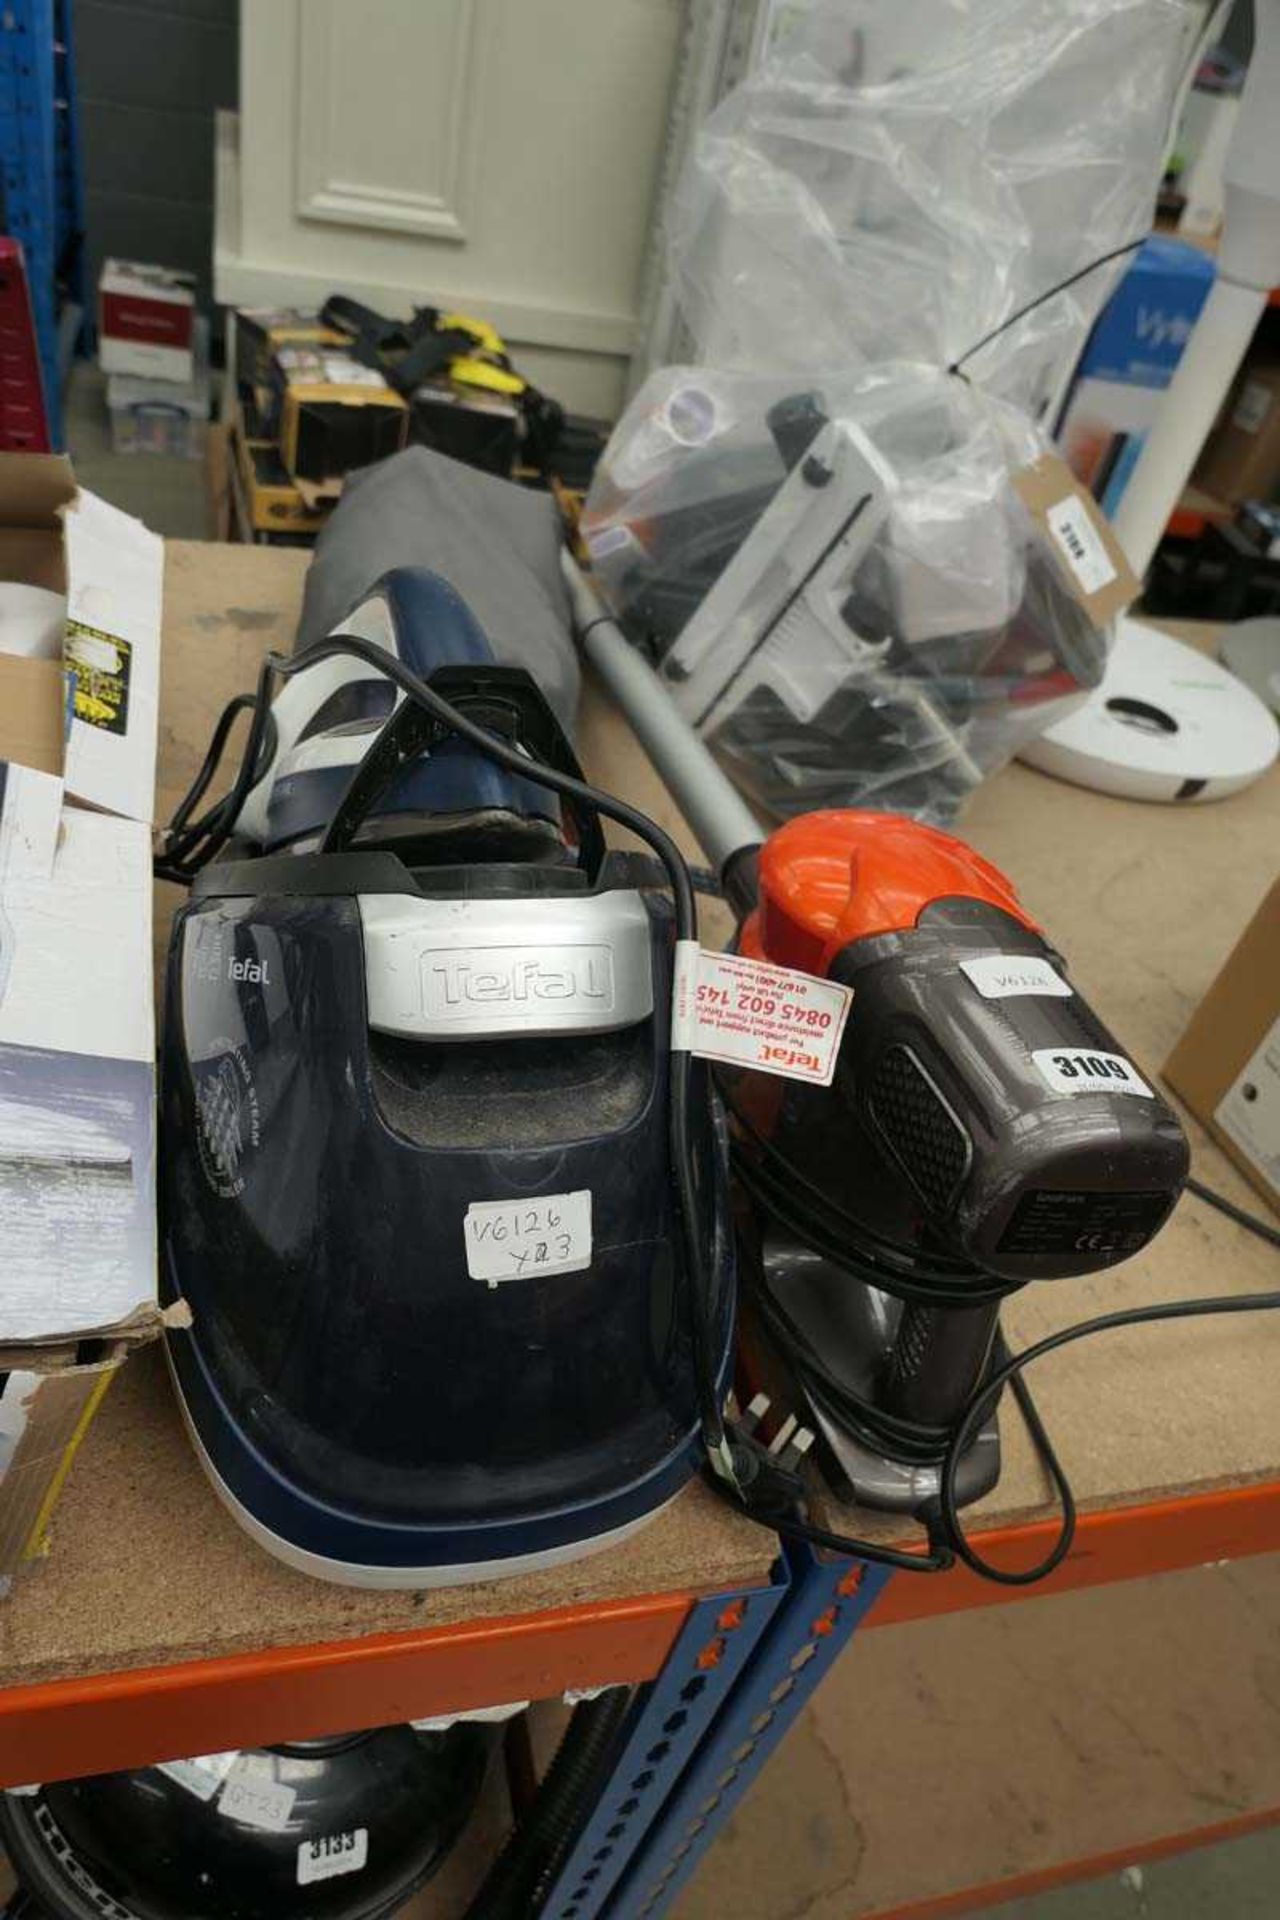 Goodmans cordless hoover plus a Tefal iron and a Tefal clothes steamer